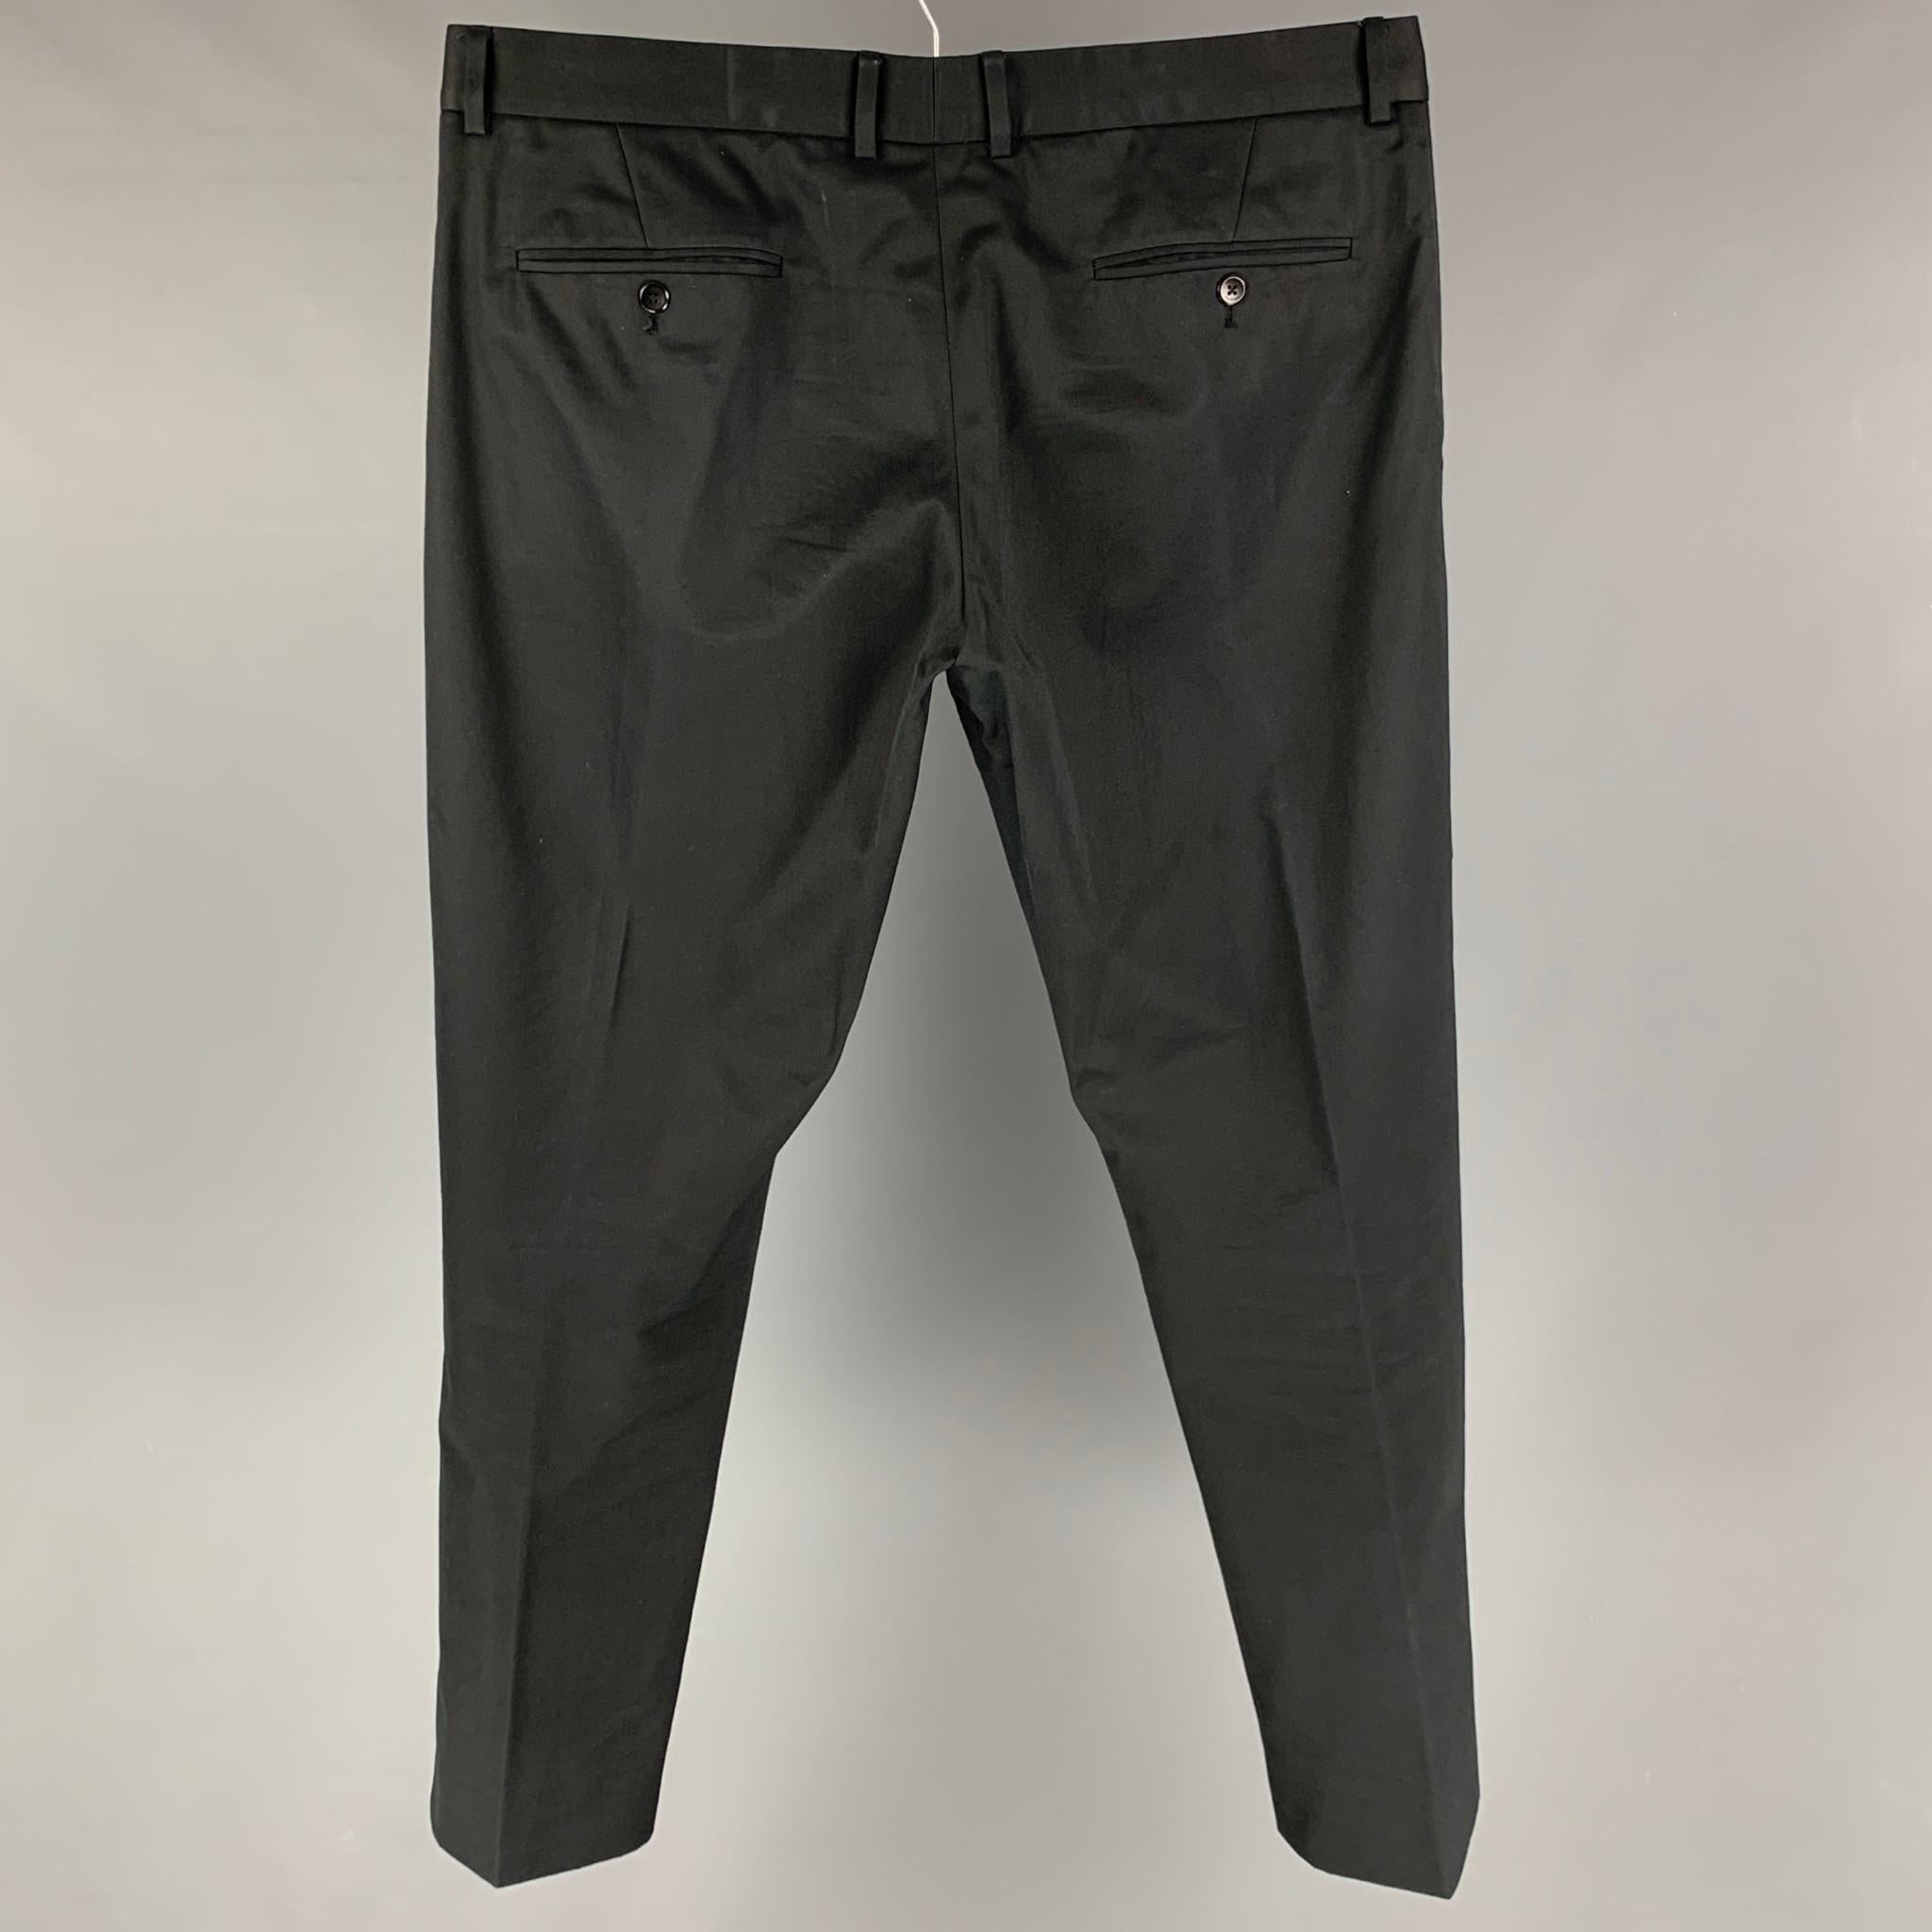 LOUIS VUITTON pants comes in a black cotton featuring a flat front, leather tab, front tab, and a zip fly closure. Made in Italy. 

Very Good Pre-Owned Condition.
Marked: 48

Measurements:

Waist: 36 in.
Rise: 10 in.
Inseam: 33 in. 